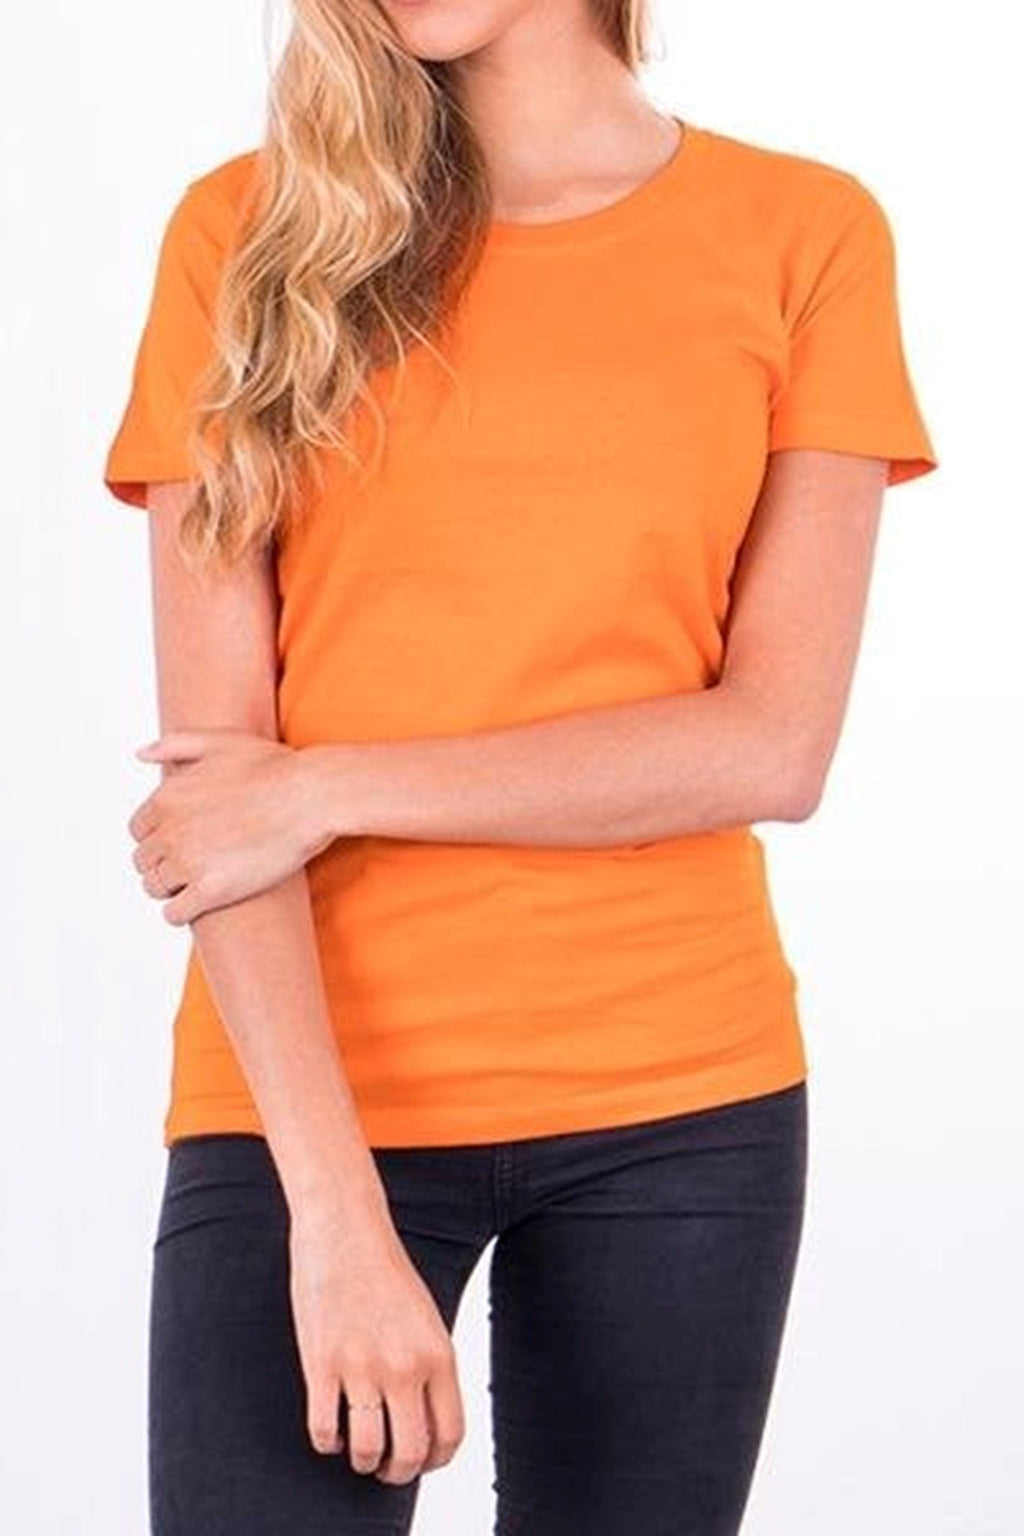 Fitted t-shirt - Orange